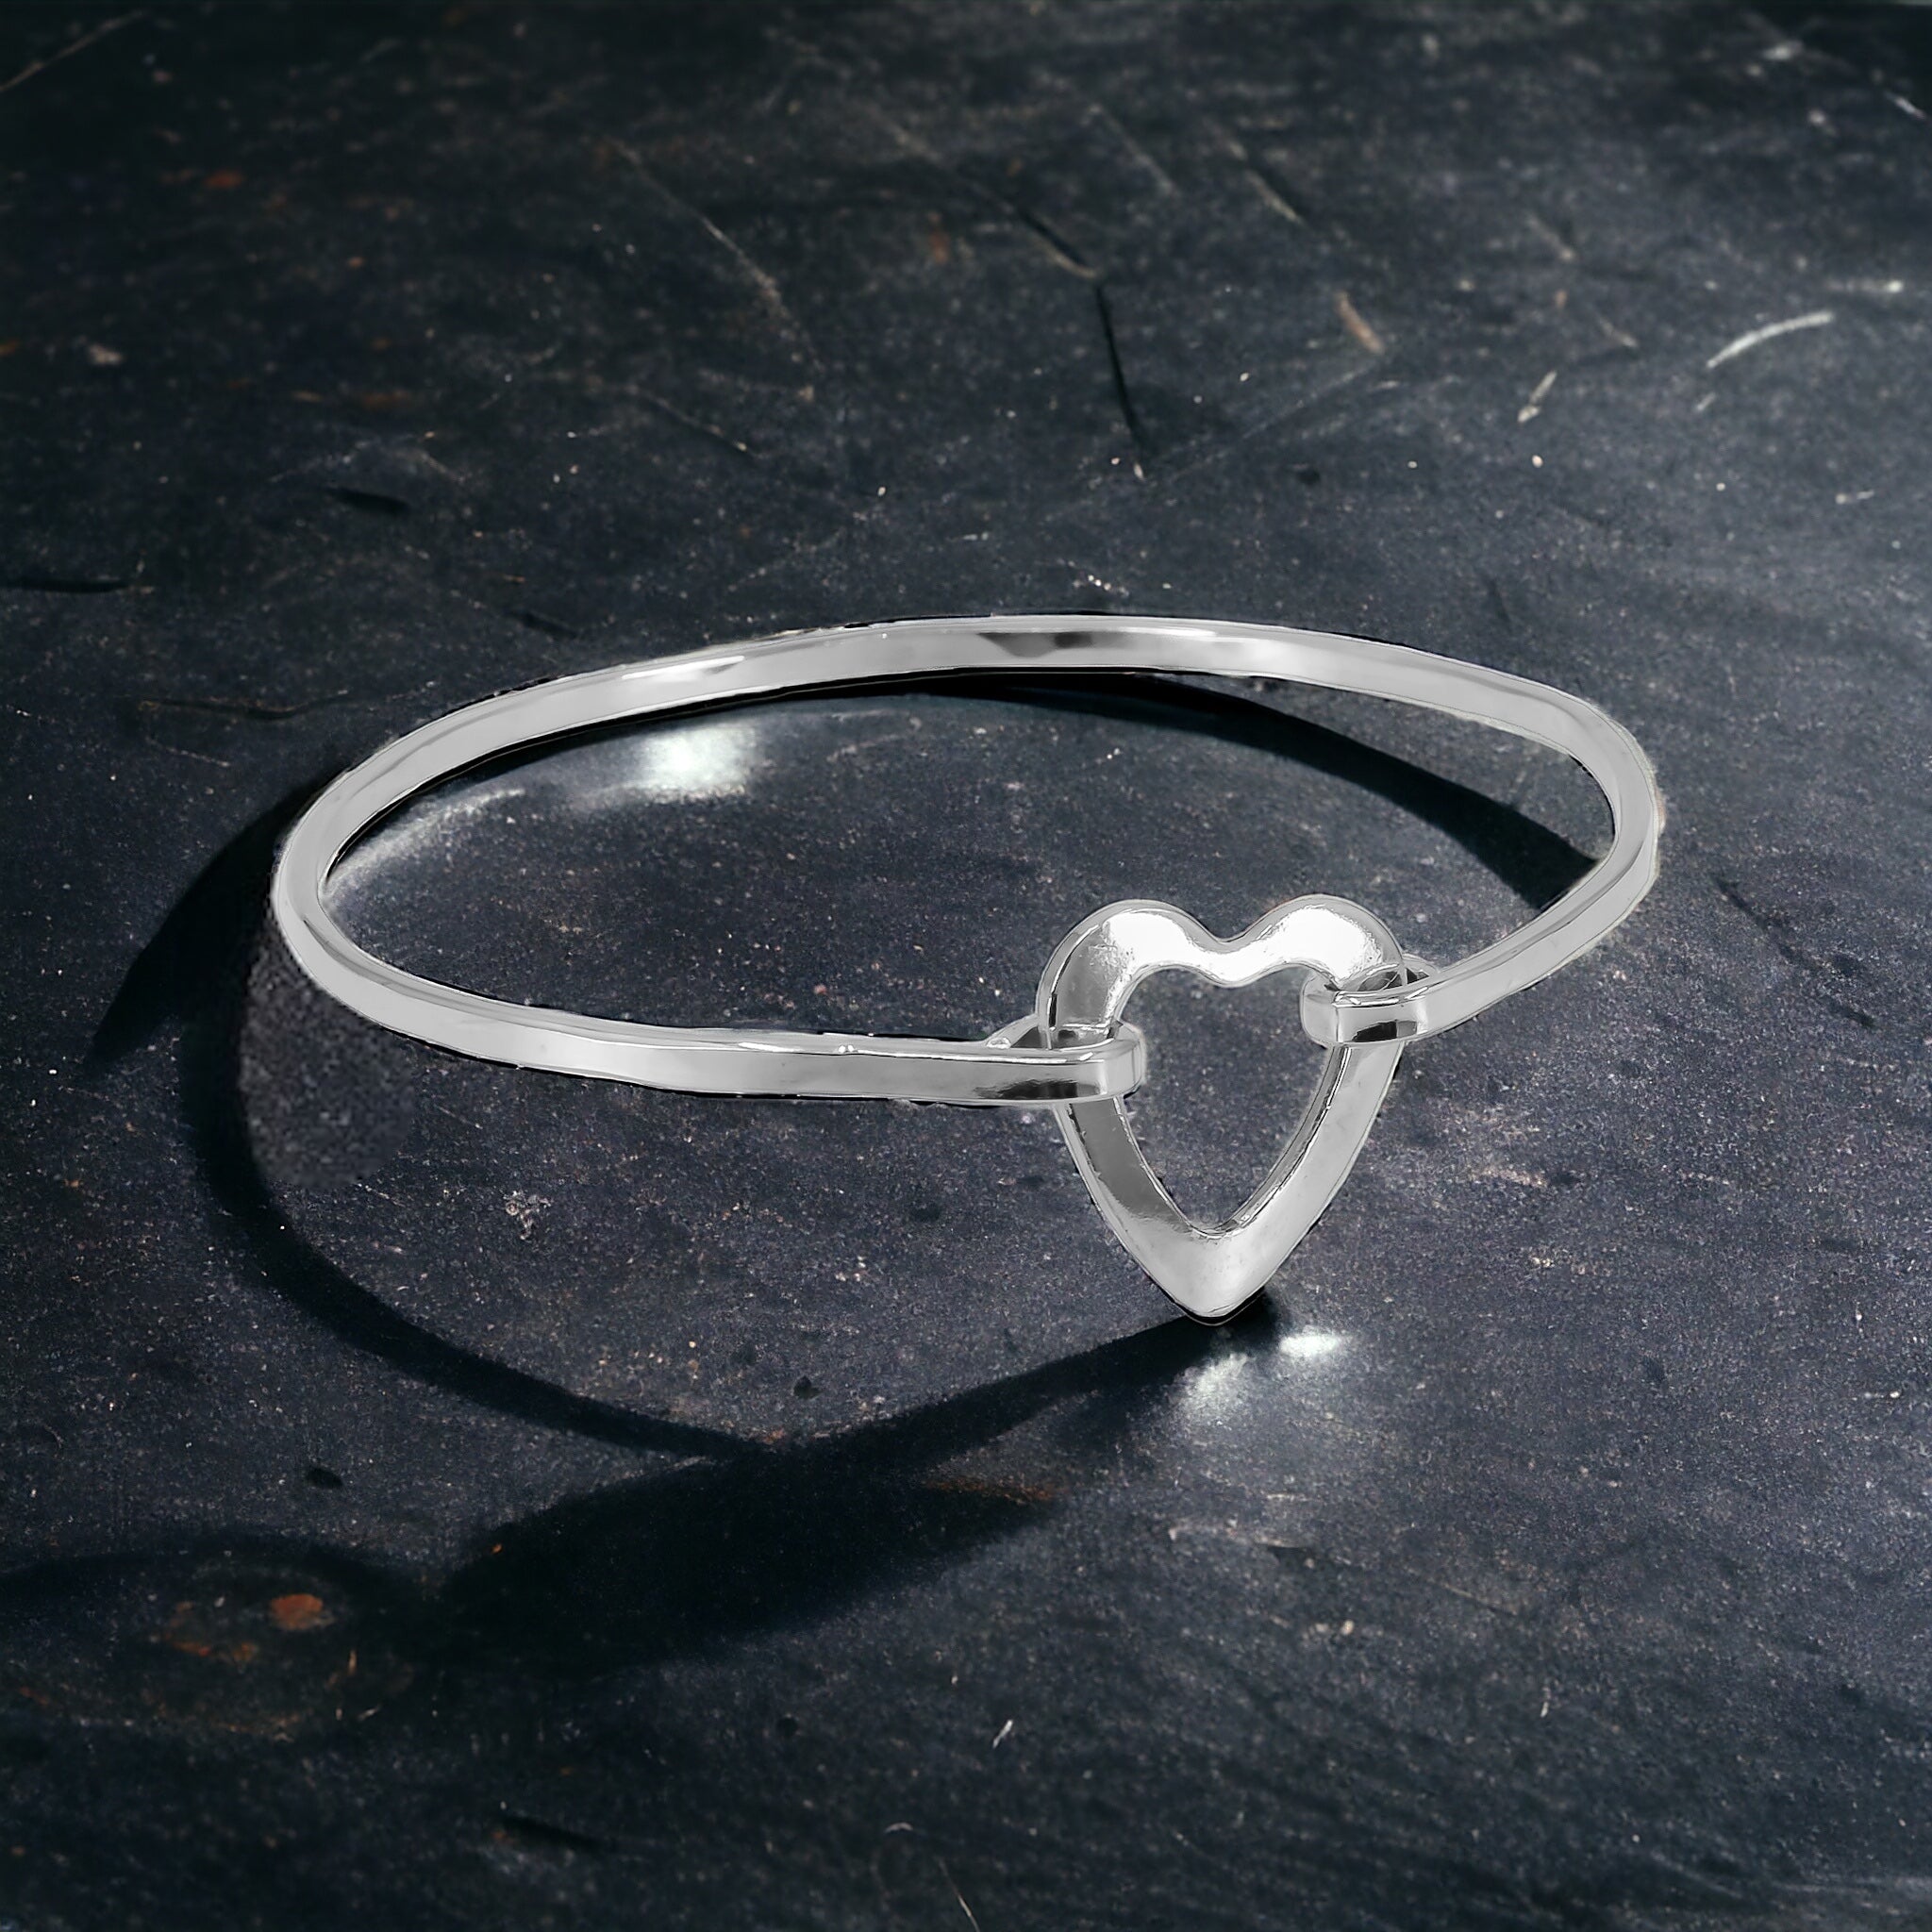 sterling silver open heart bangle bracelet with a hinged closure system